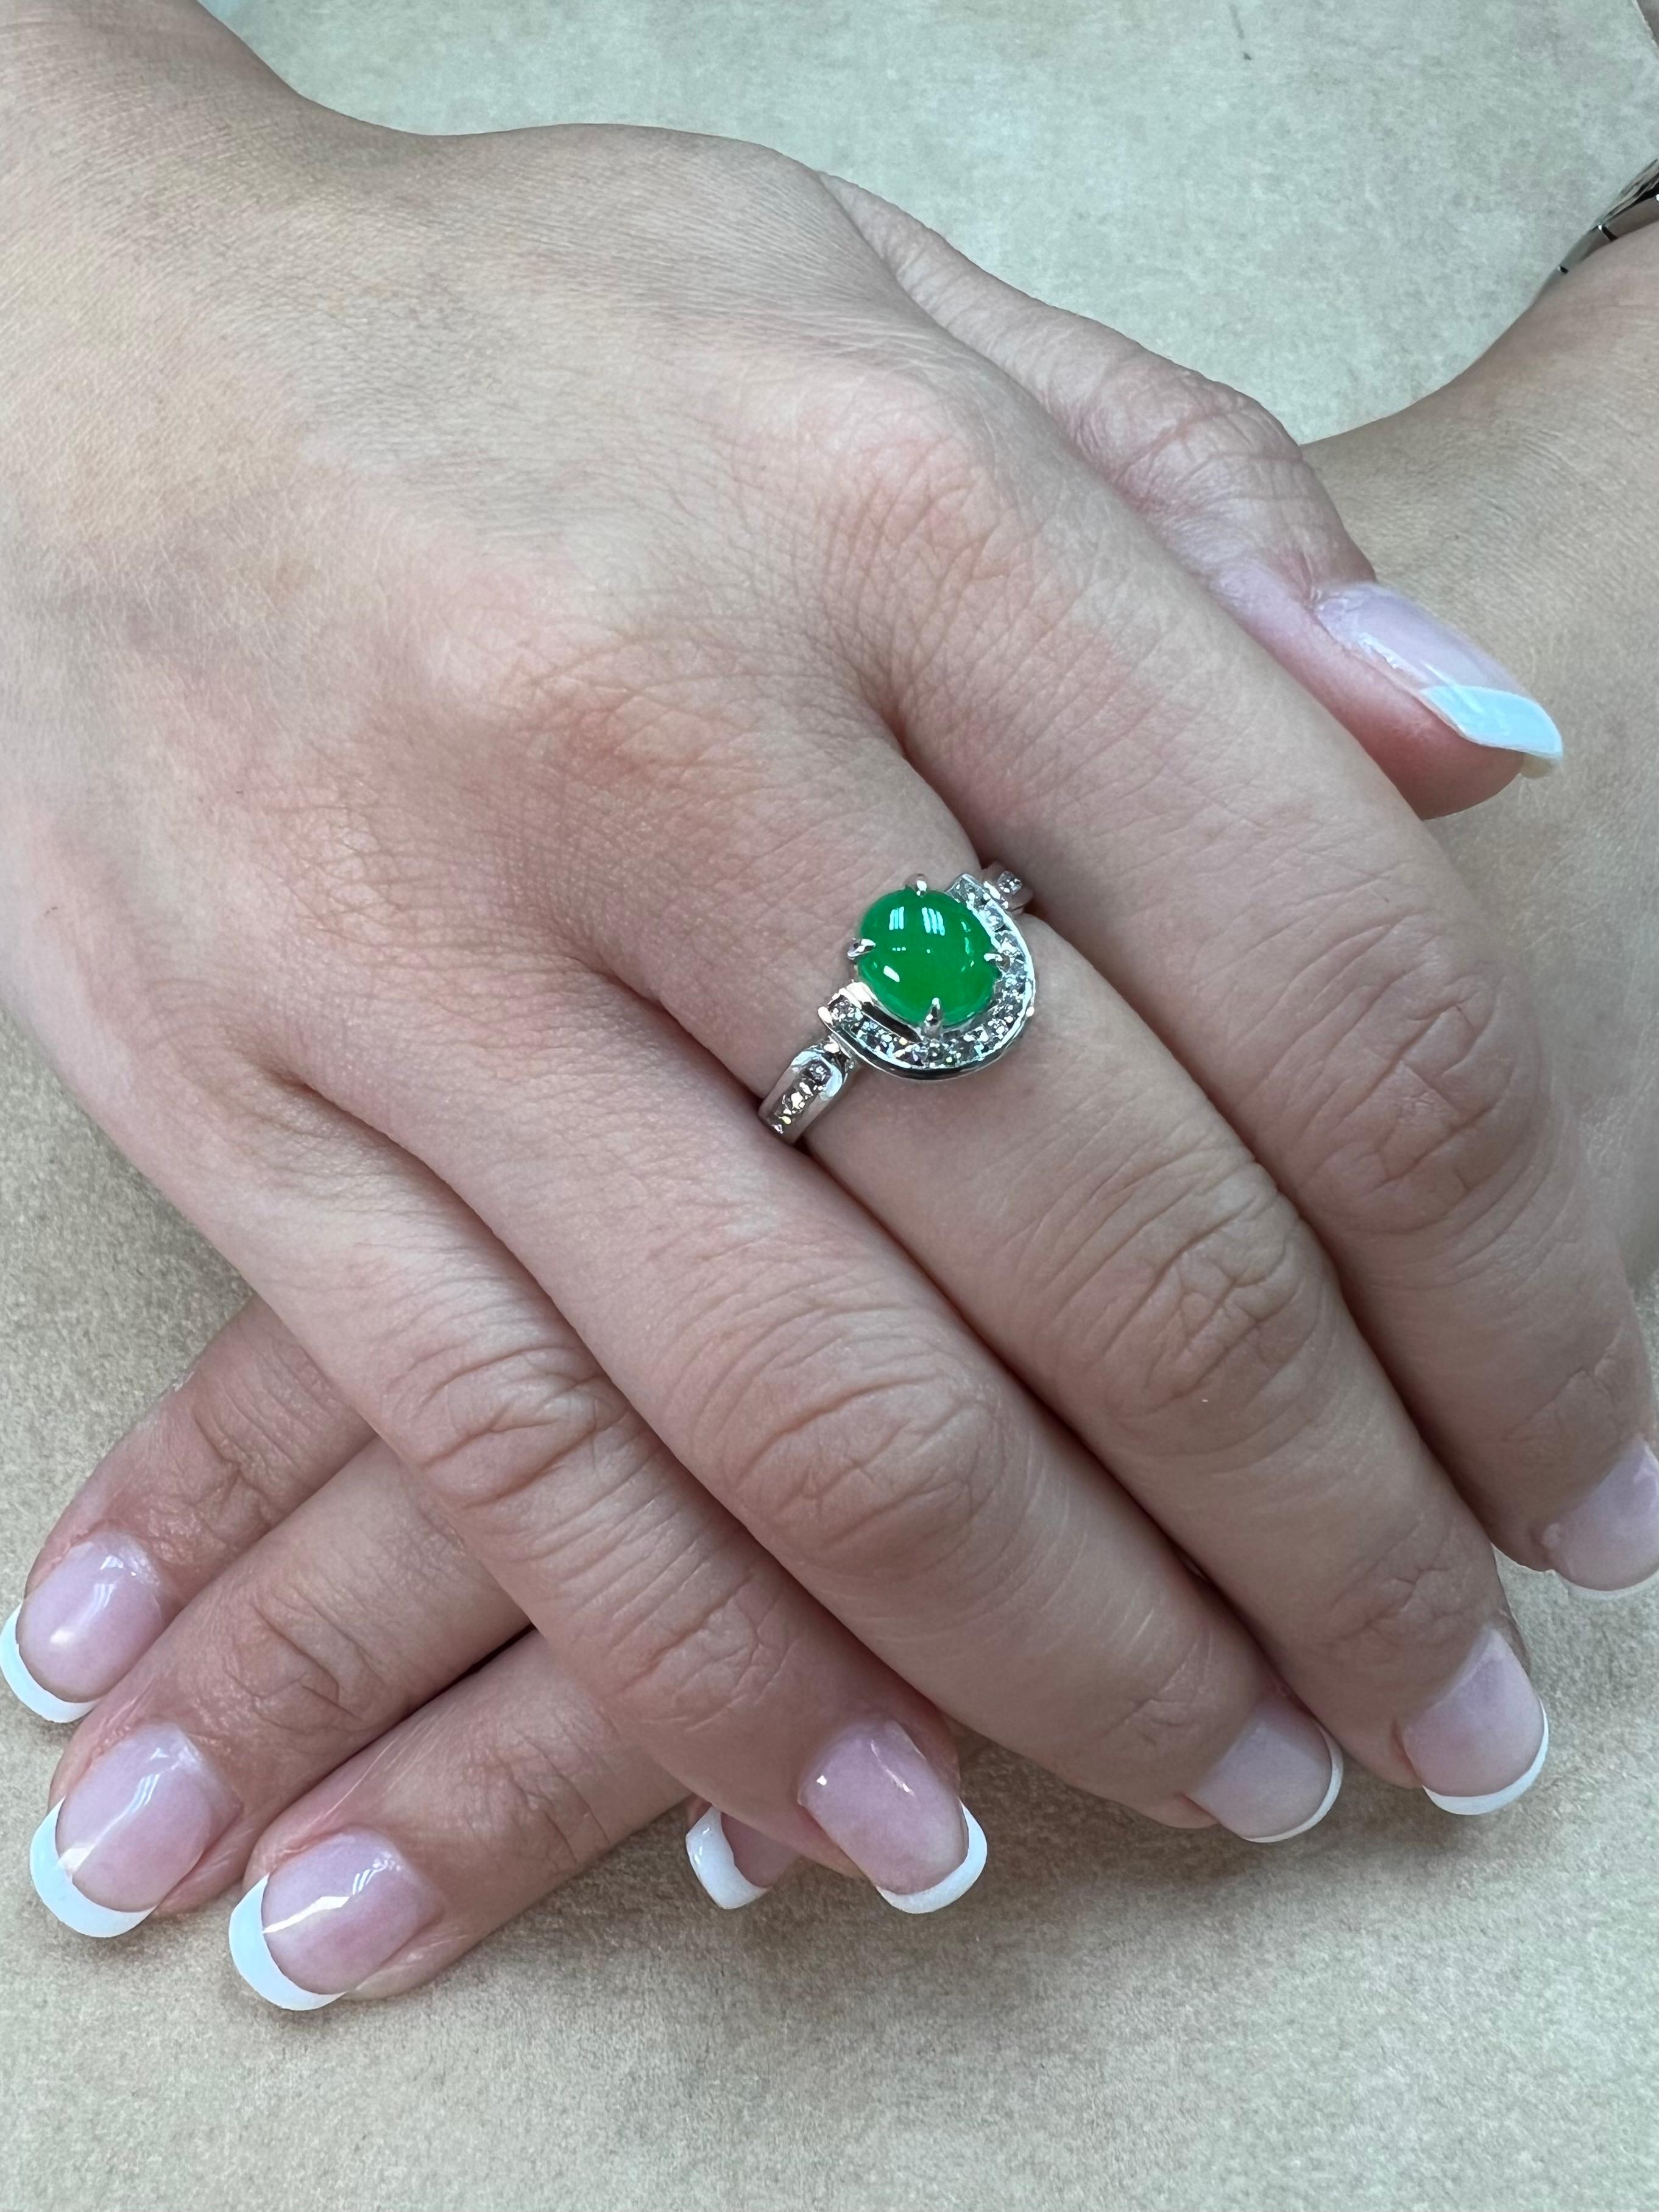 Please check out the HD video! Here is a bright apple green oval cabochon jade and diamond ring. This ring is handmade and designed with the lucky horseshoe motif. This jadeite jade is certified natural with no treatment or enhancement. The ring is